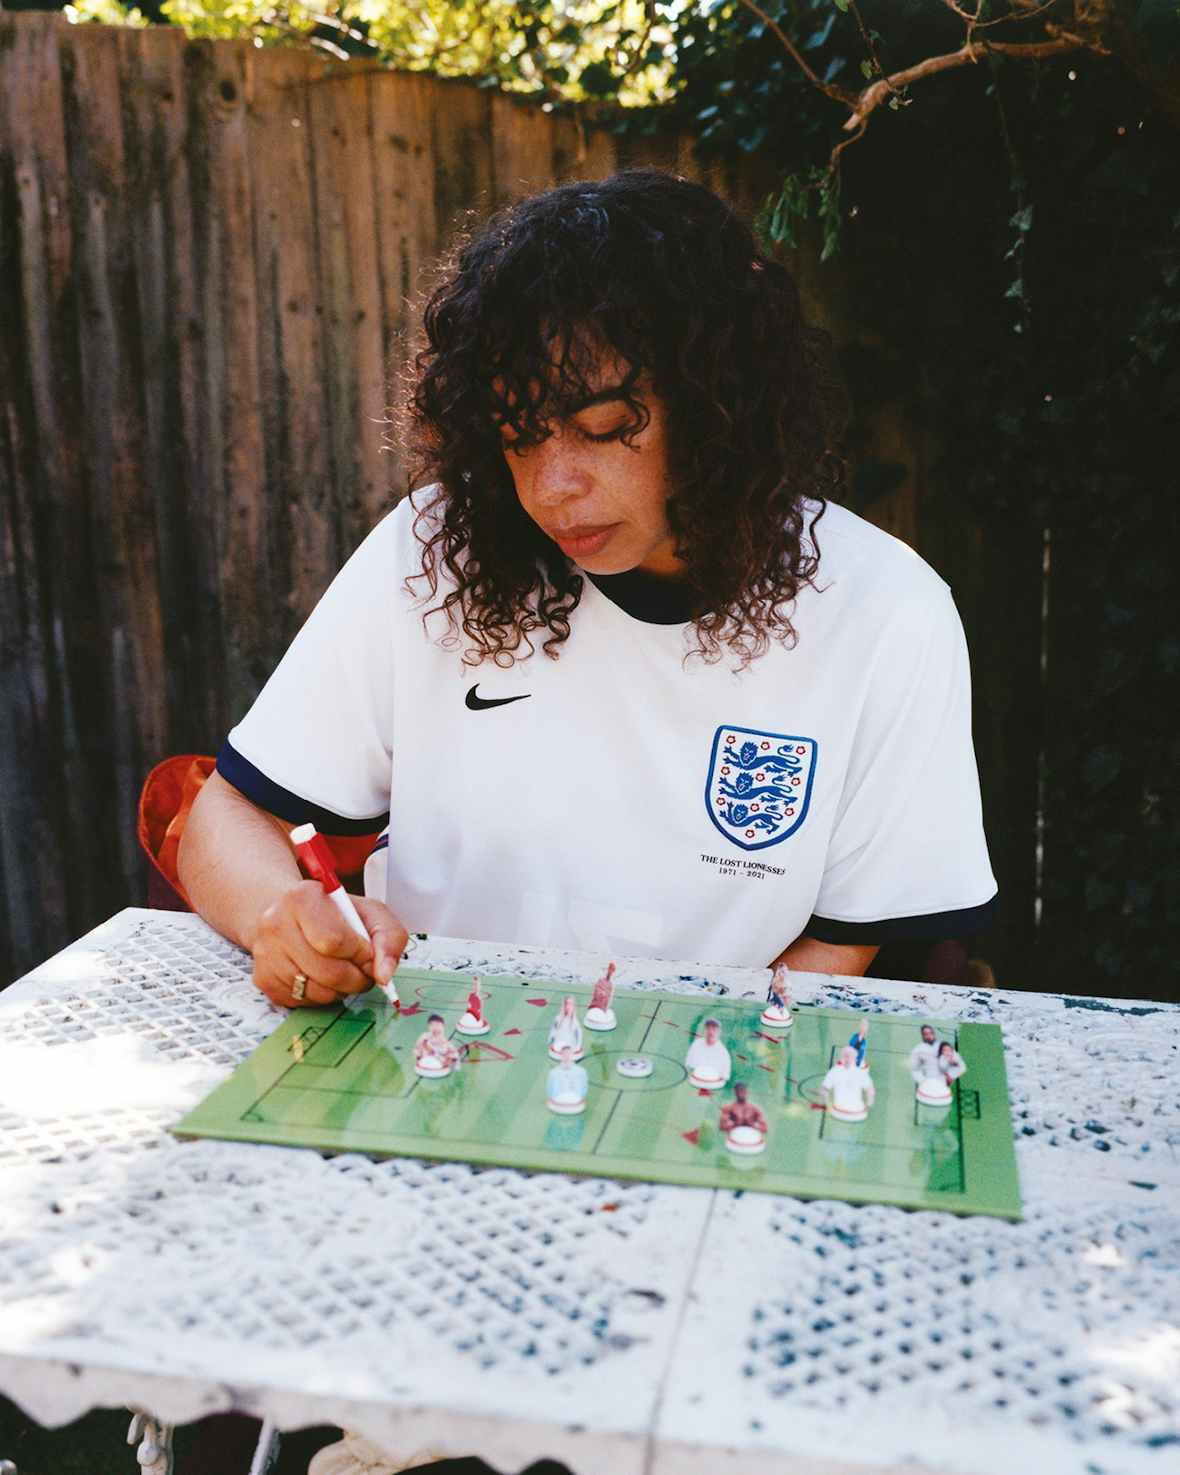 Martine Rose on designing a new England shirt - The Face